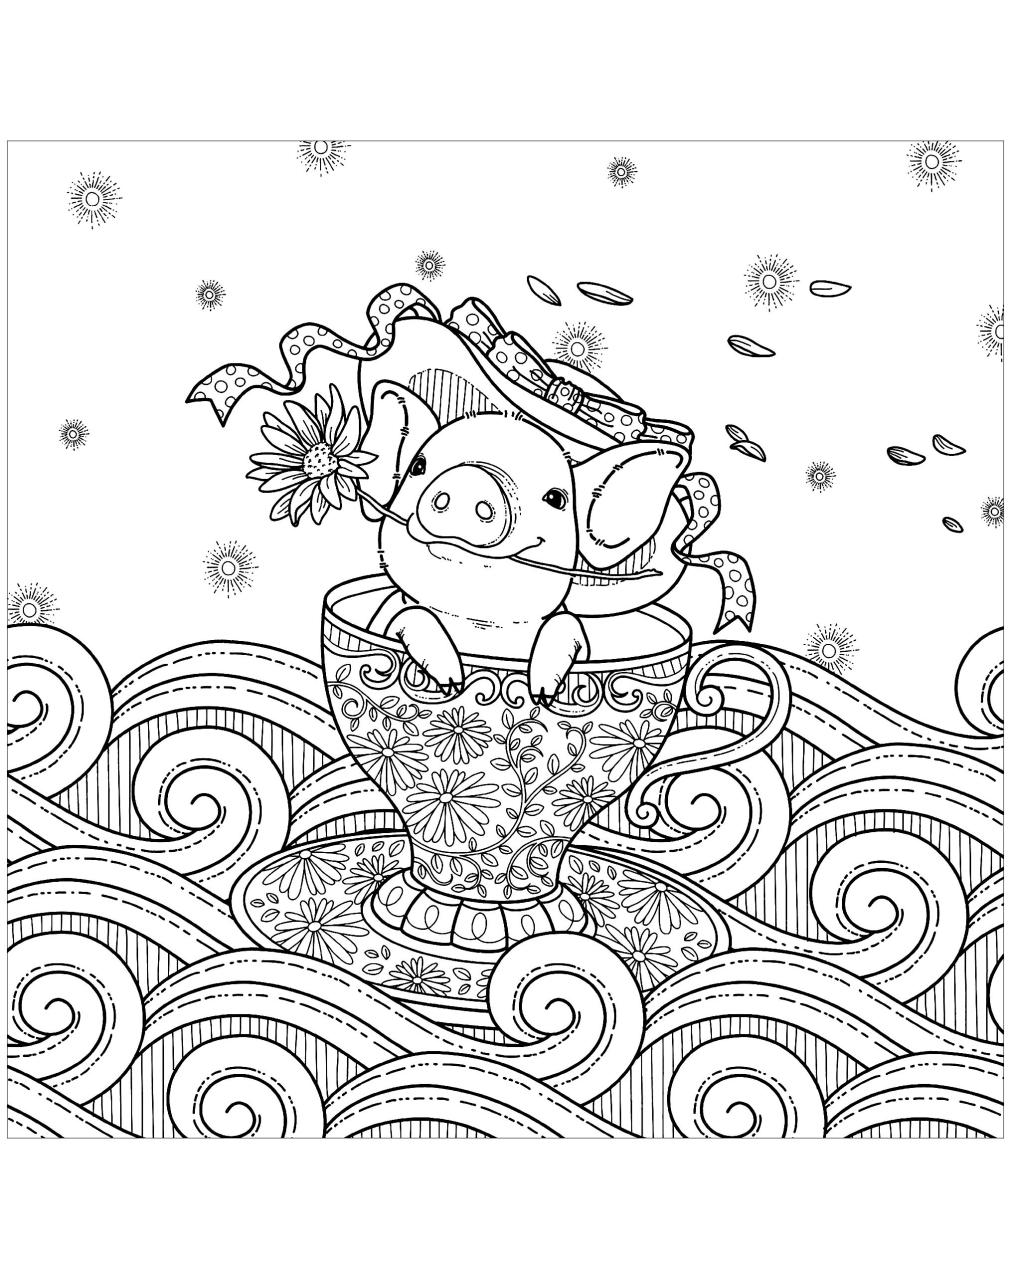 Pig in a cup Pigs Adult Coloring Pages